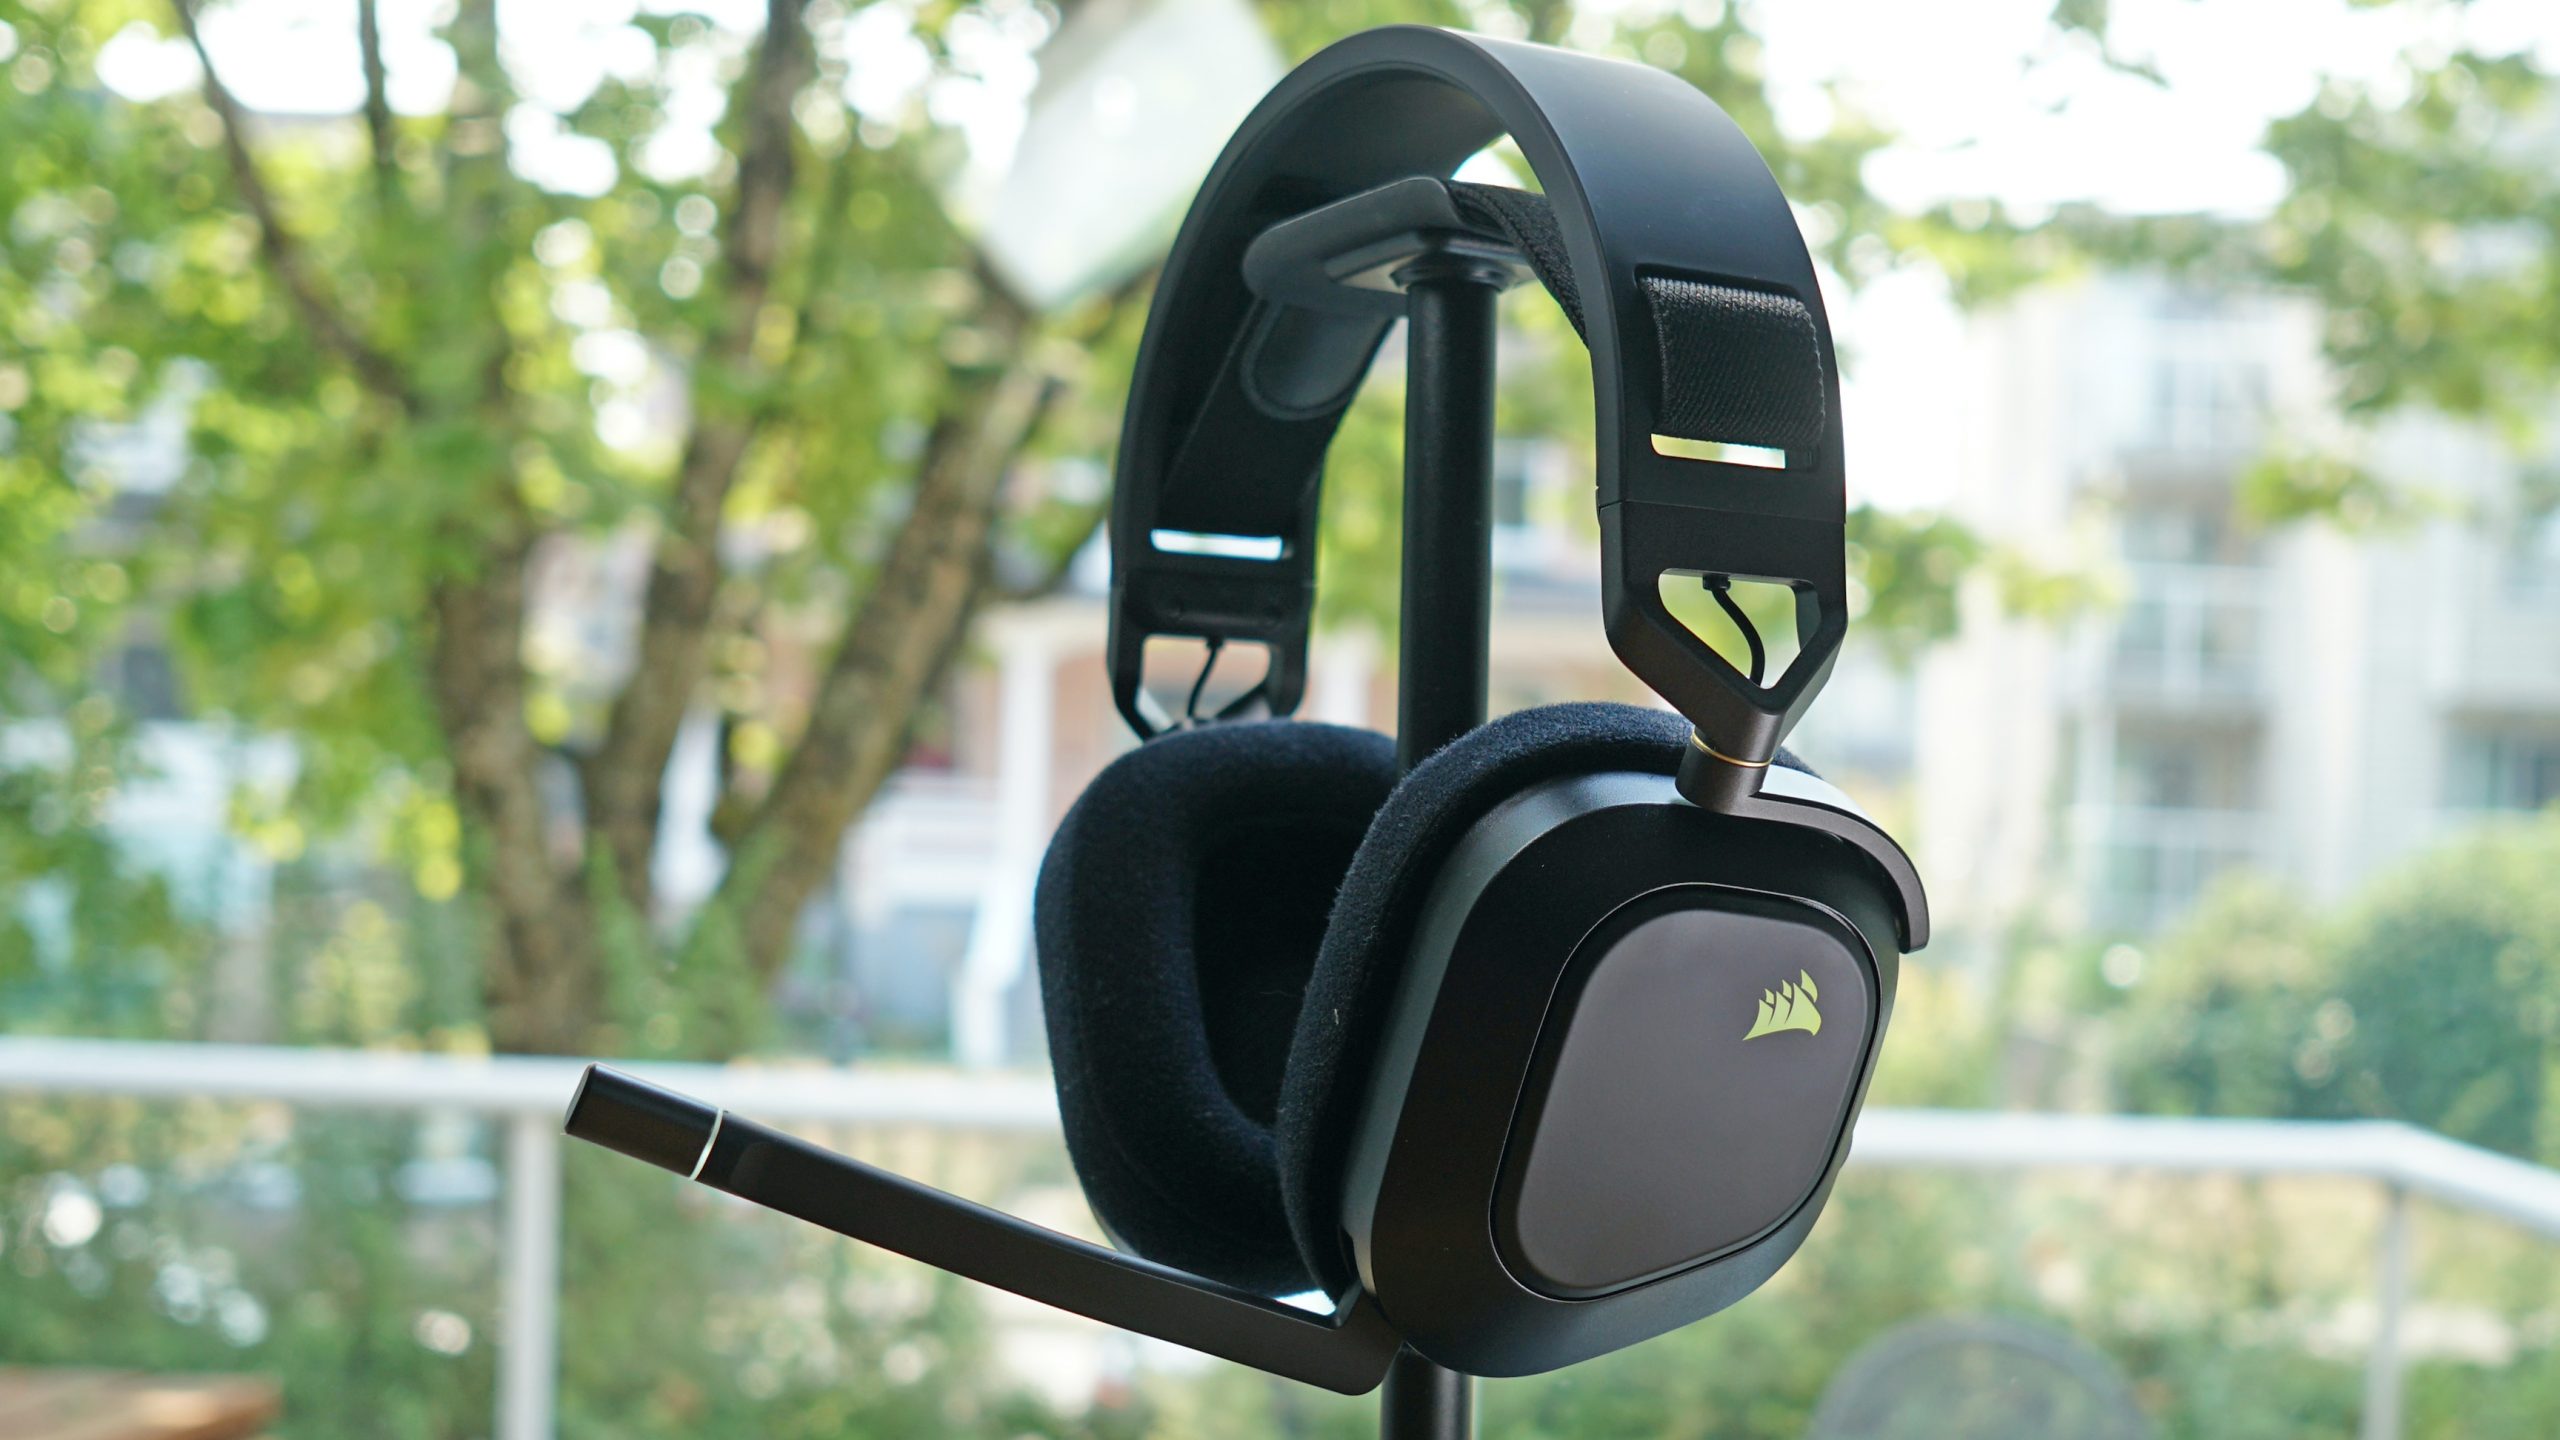 The Corsair HS80 RGB Wireless sits on a headphone stand in front of a window